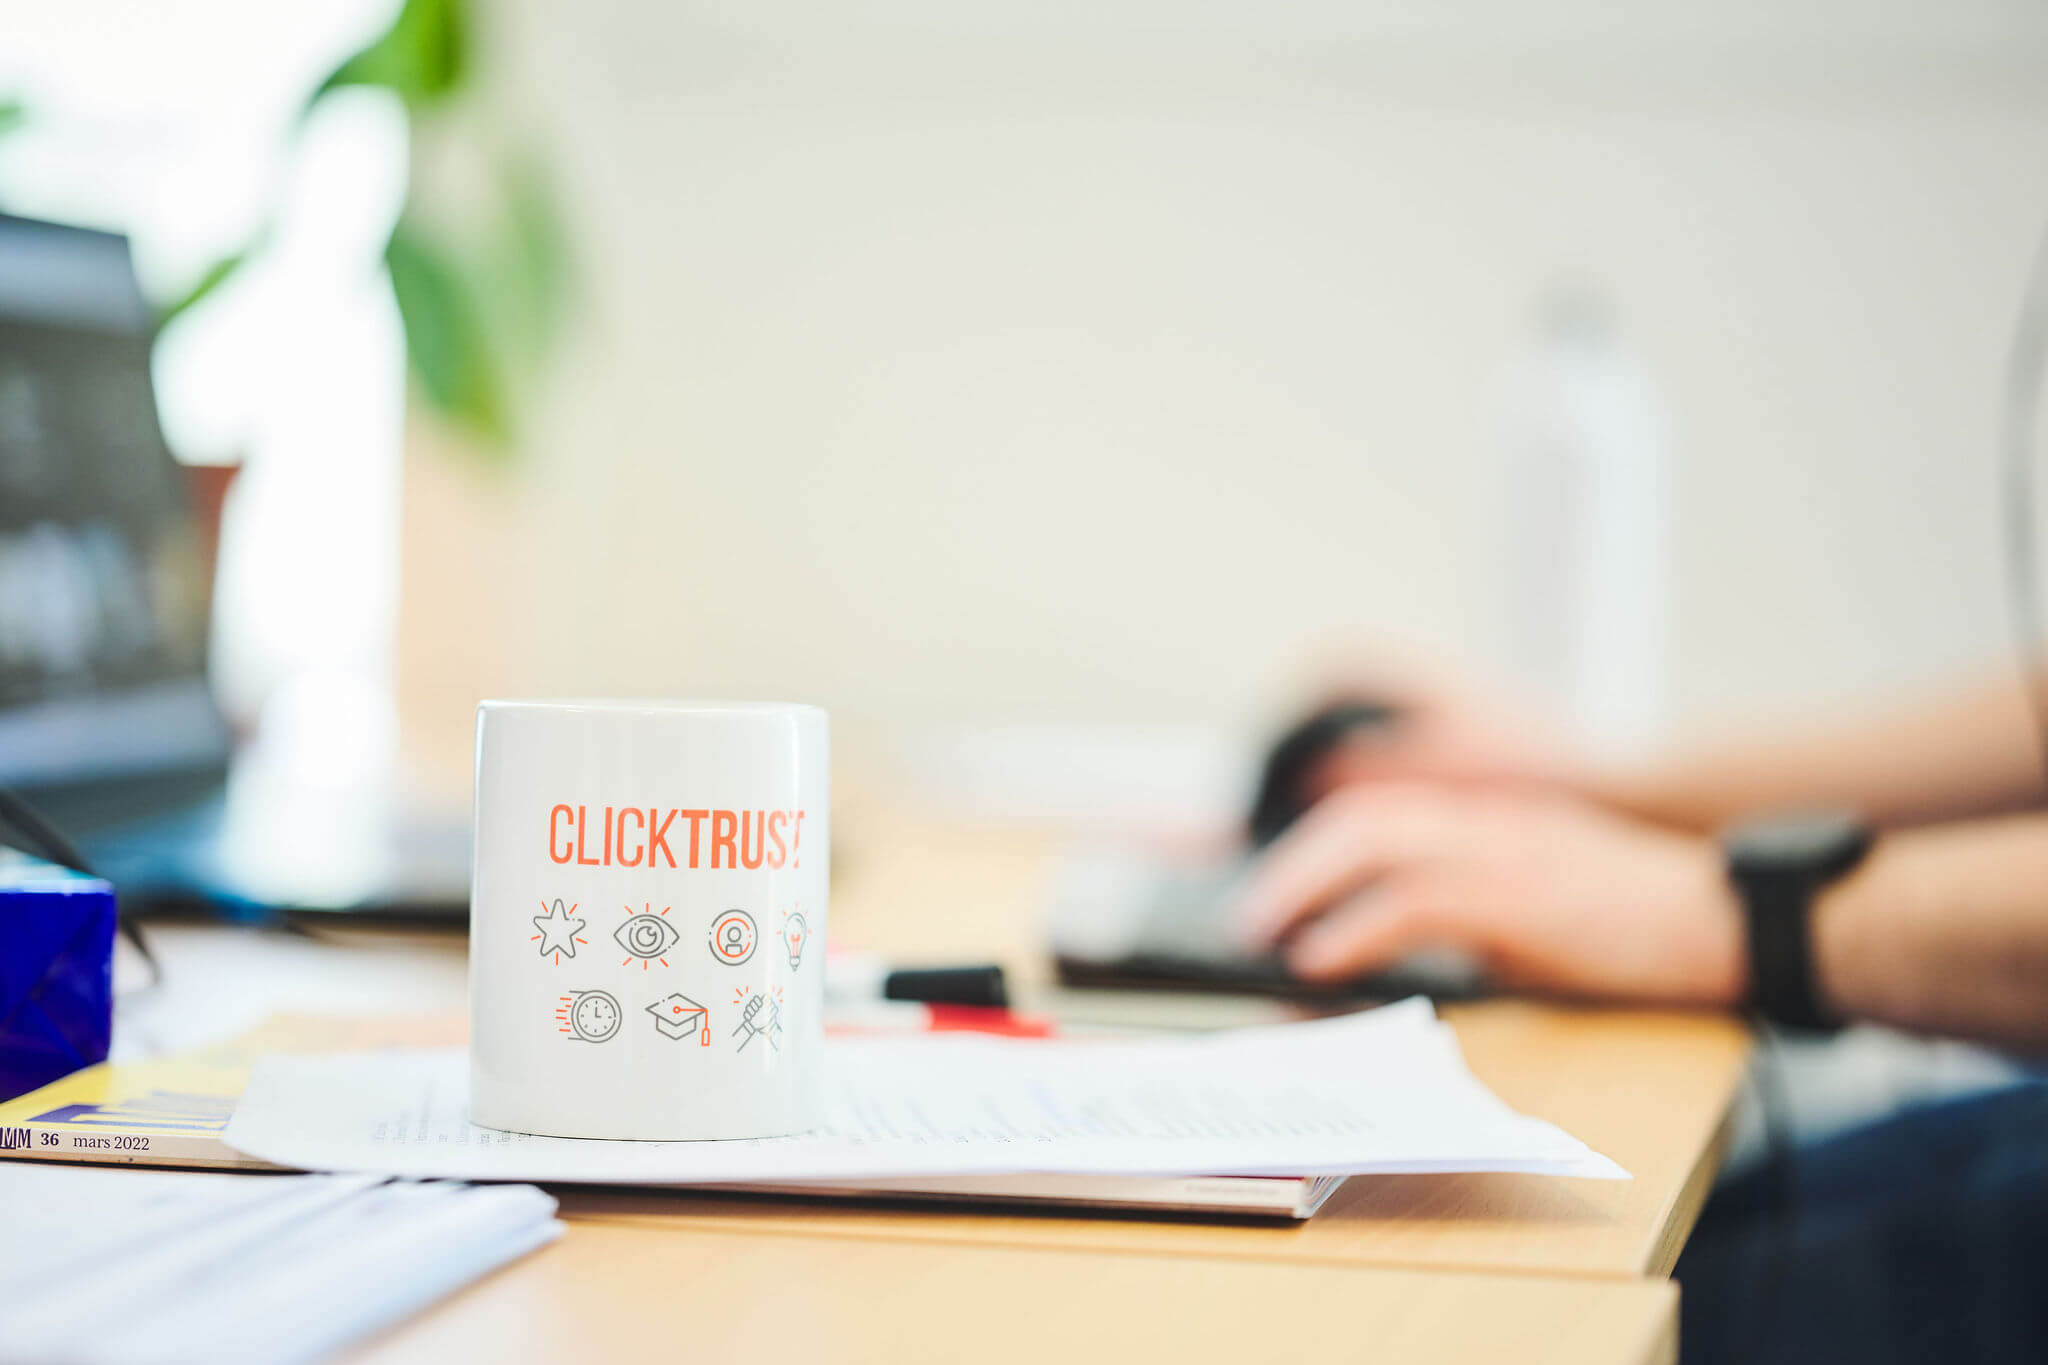 The CLICKTRUST monthly pick – July 2022